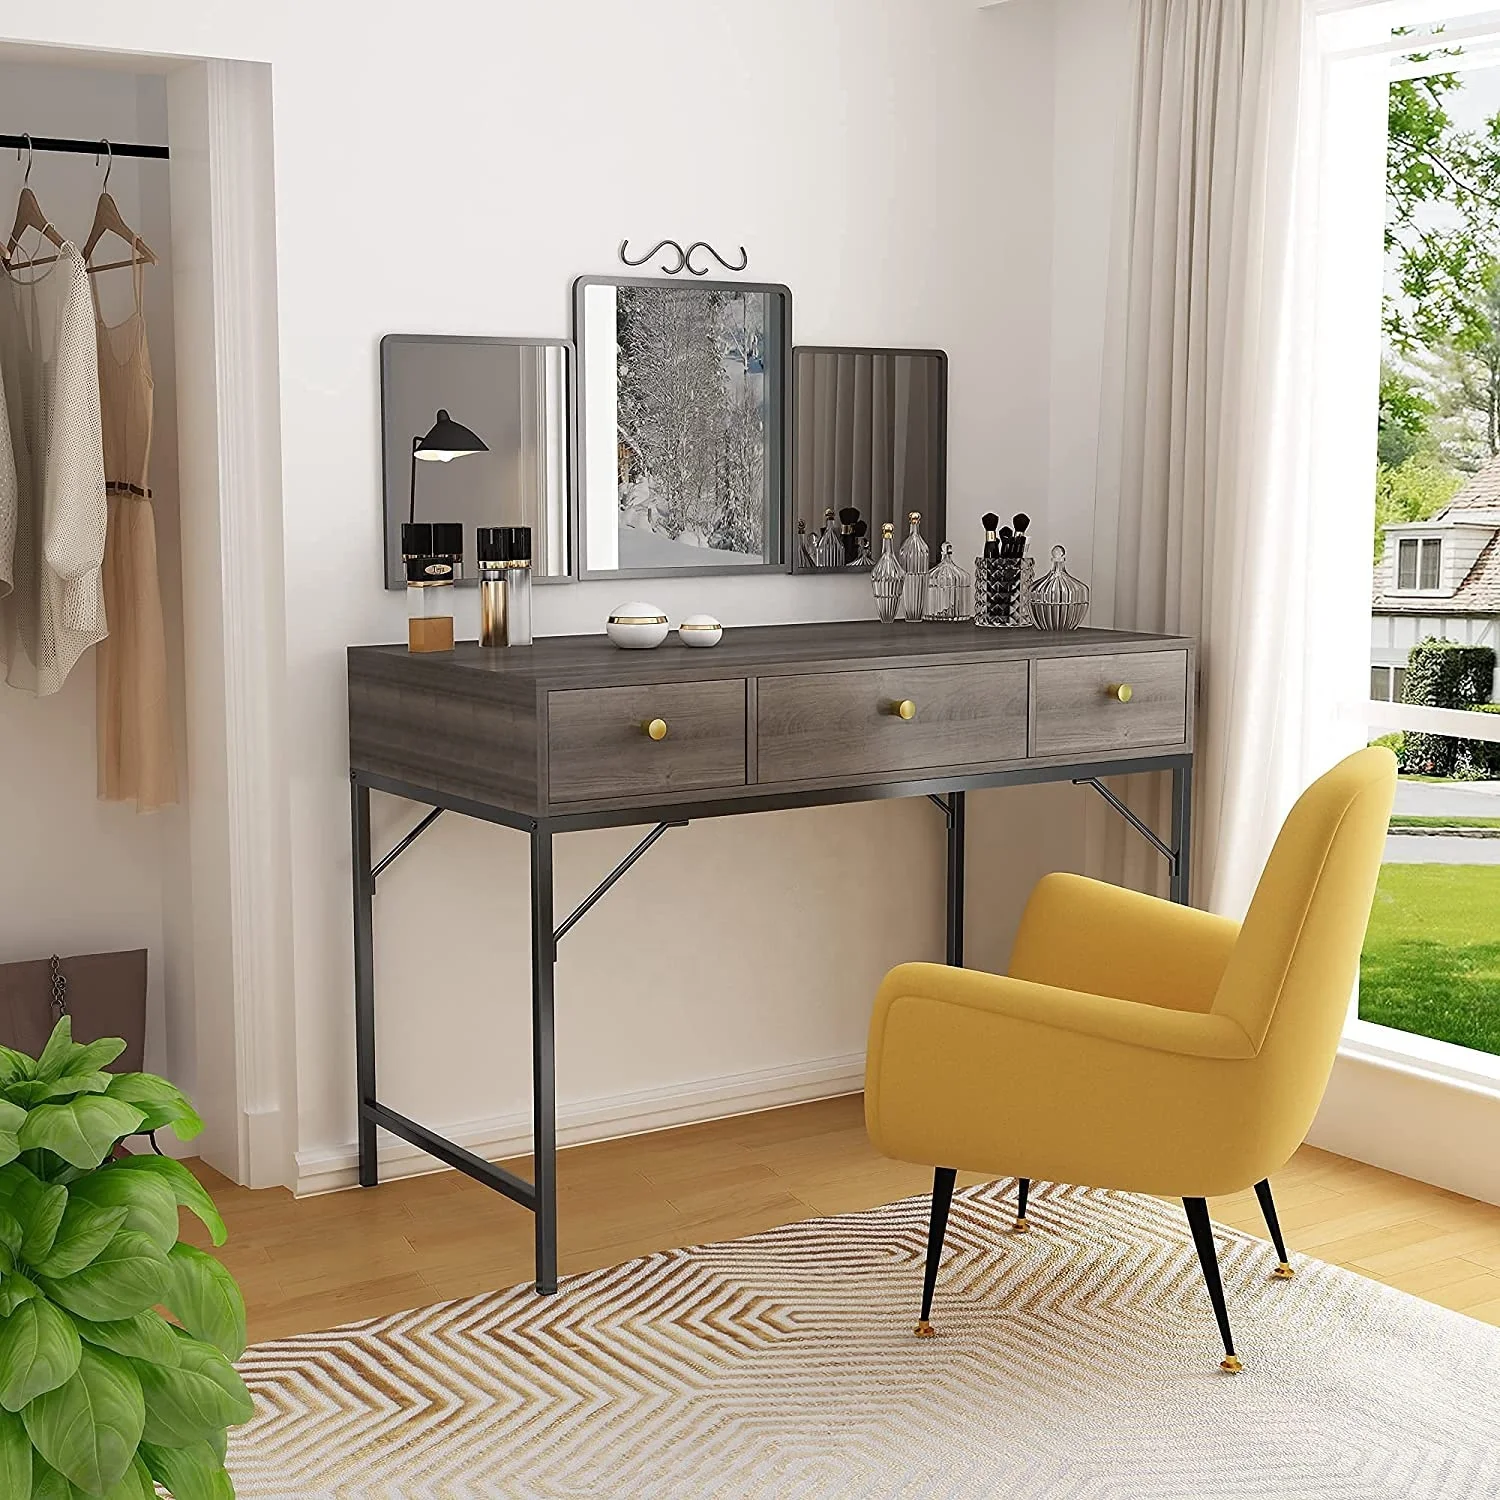 Popular in Bosnia high-end Modern Vanity Desk Makeup Dressing Table with 3 drawers Can also be used to learn to place computer